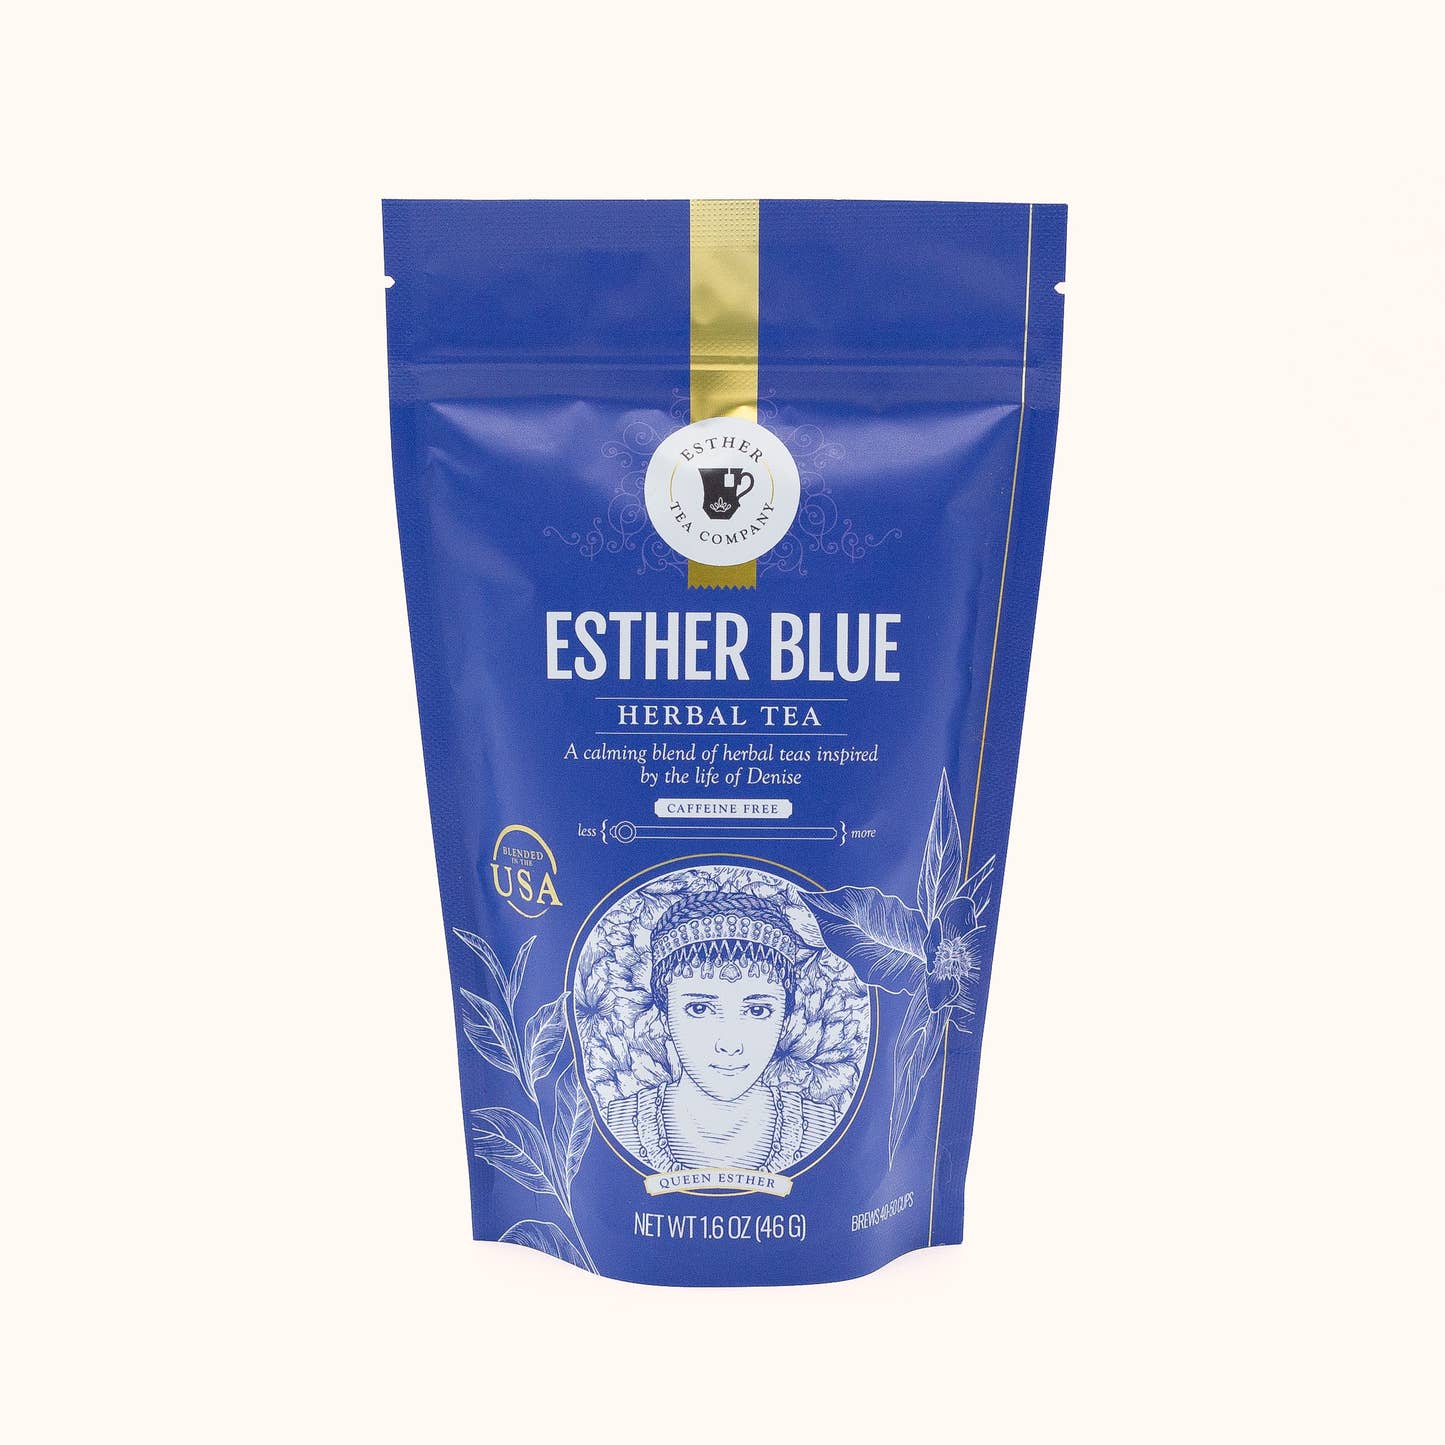 Esther Blue loose leaf tea pouch by Esther Tea Company